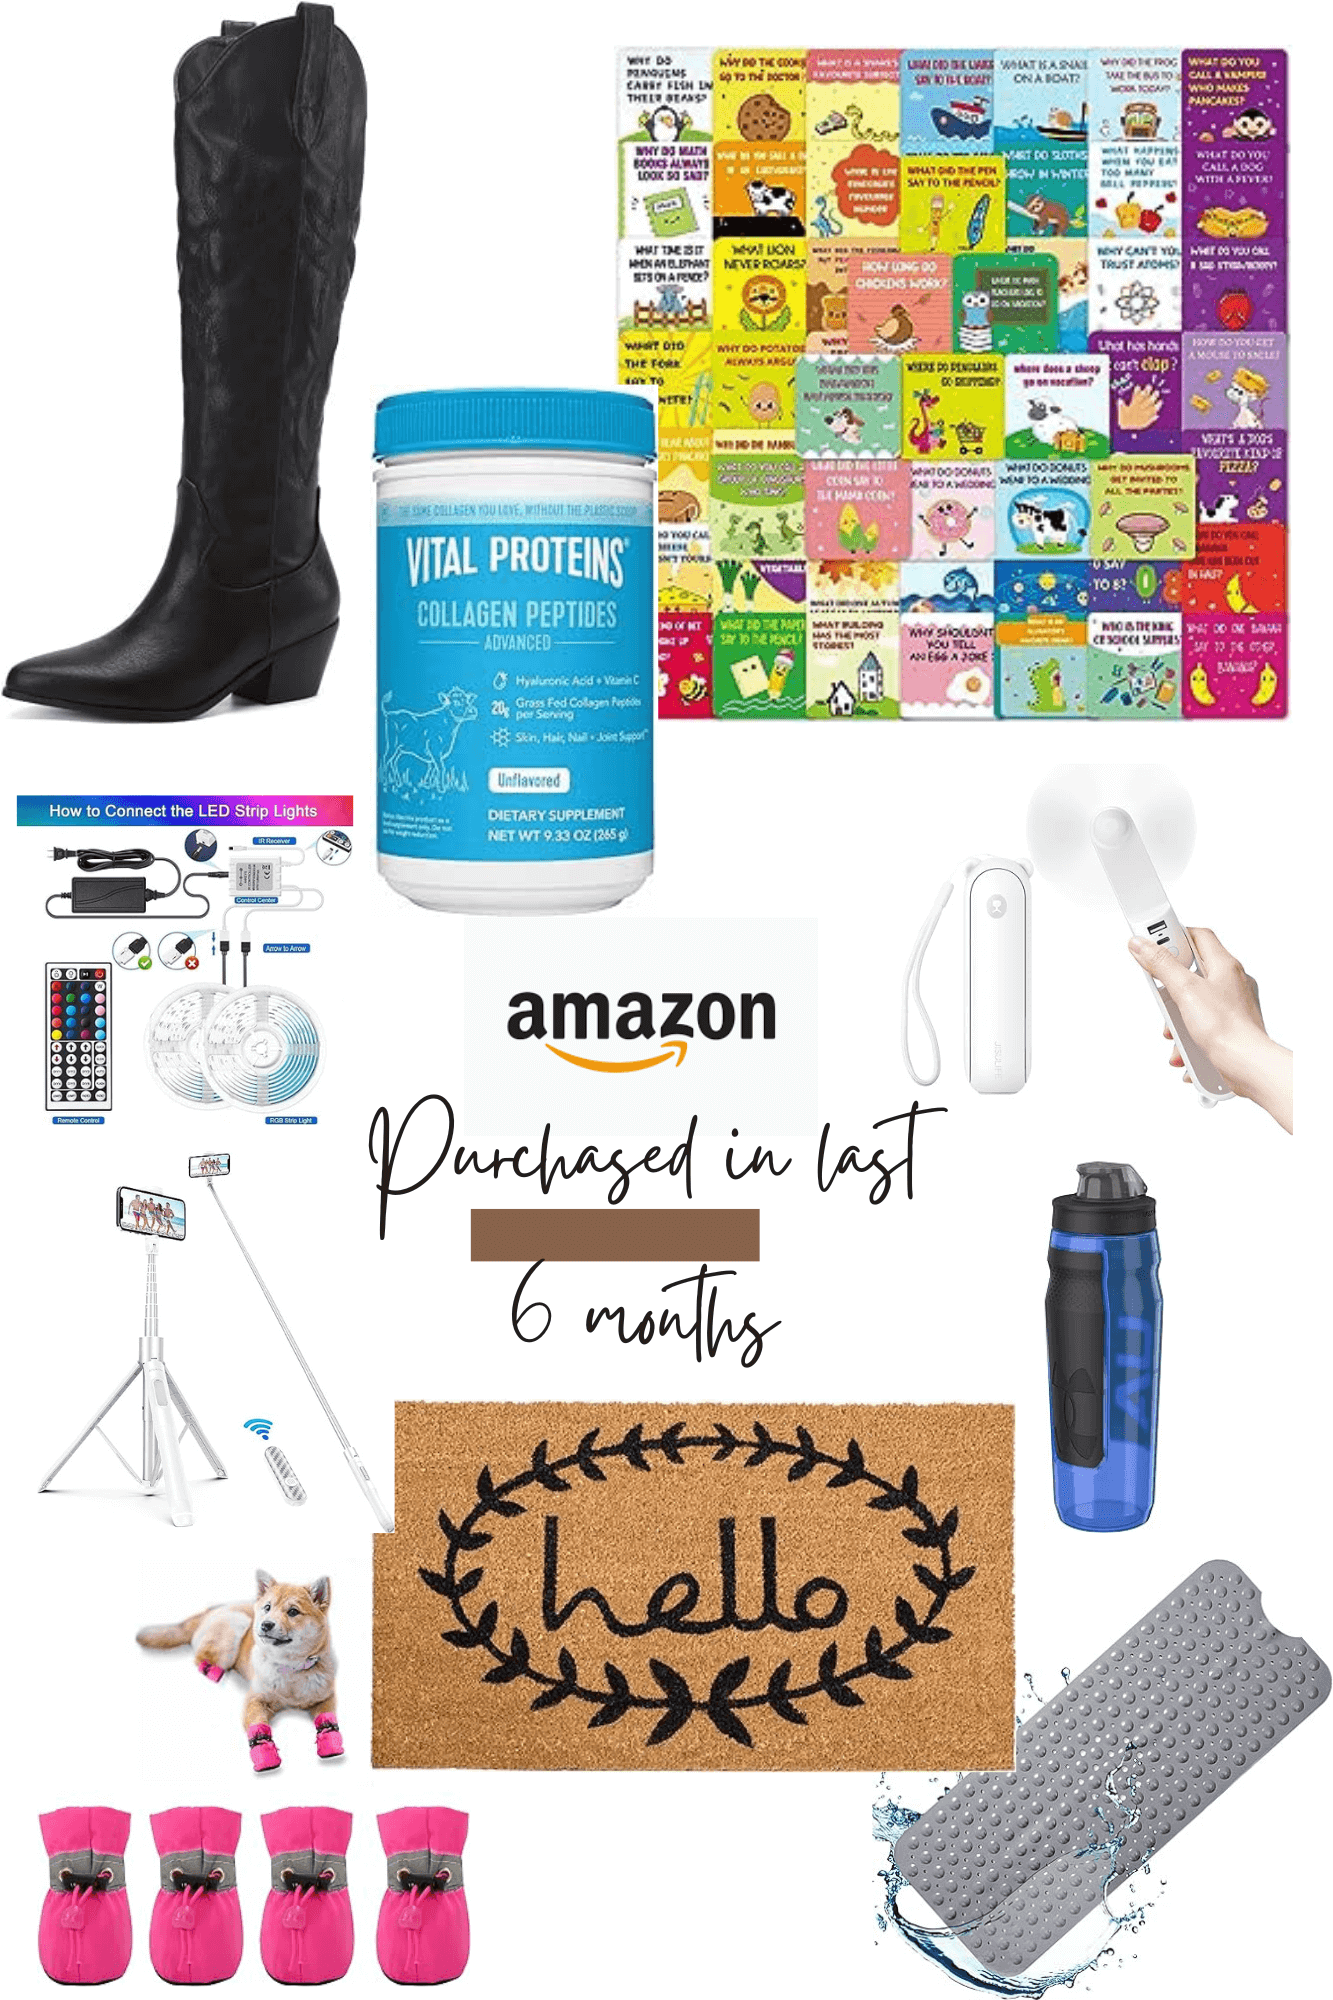 Amazon prime day purchases in last 6 months